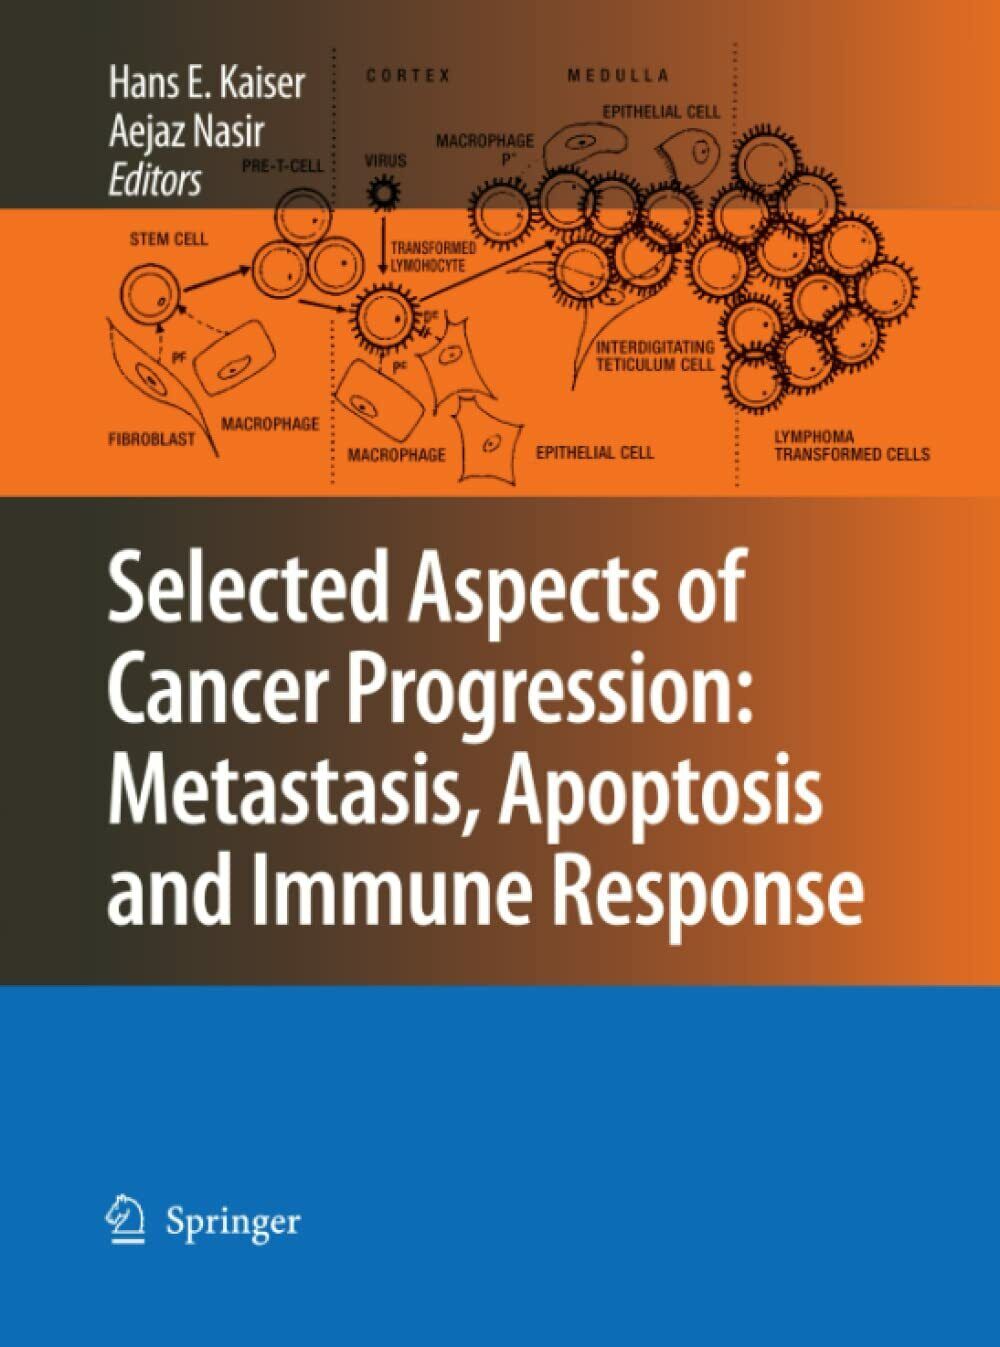 Selected Aspects of Cancer Progression: Metastasis,Apoptosis and Immune Response